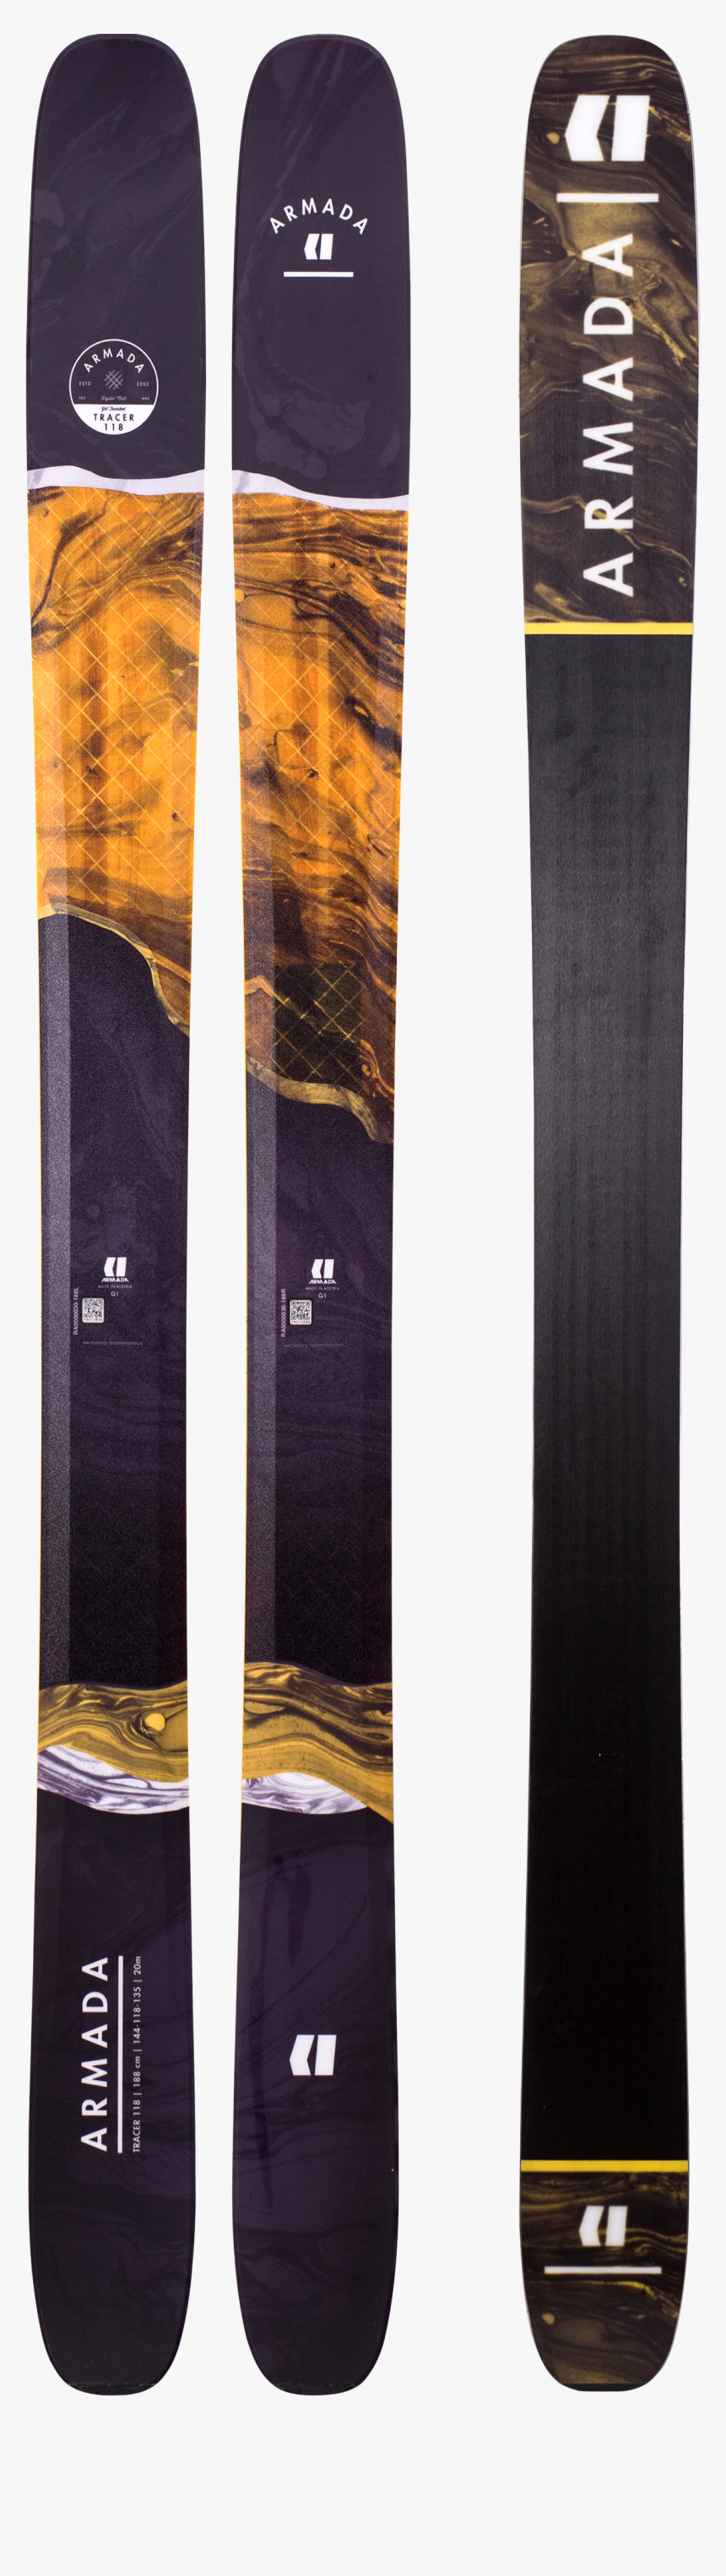 Armada Tracer 118 Chx Skis"
 Class= - Armada Tracer 118 Chx Skis 2019, HD Png Download, Free Download